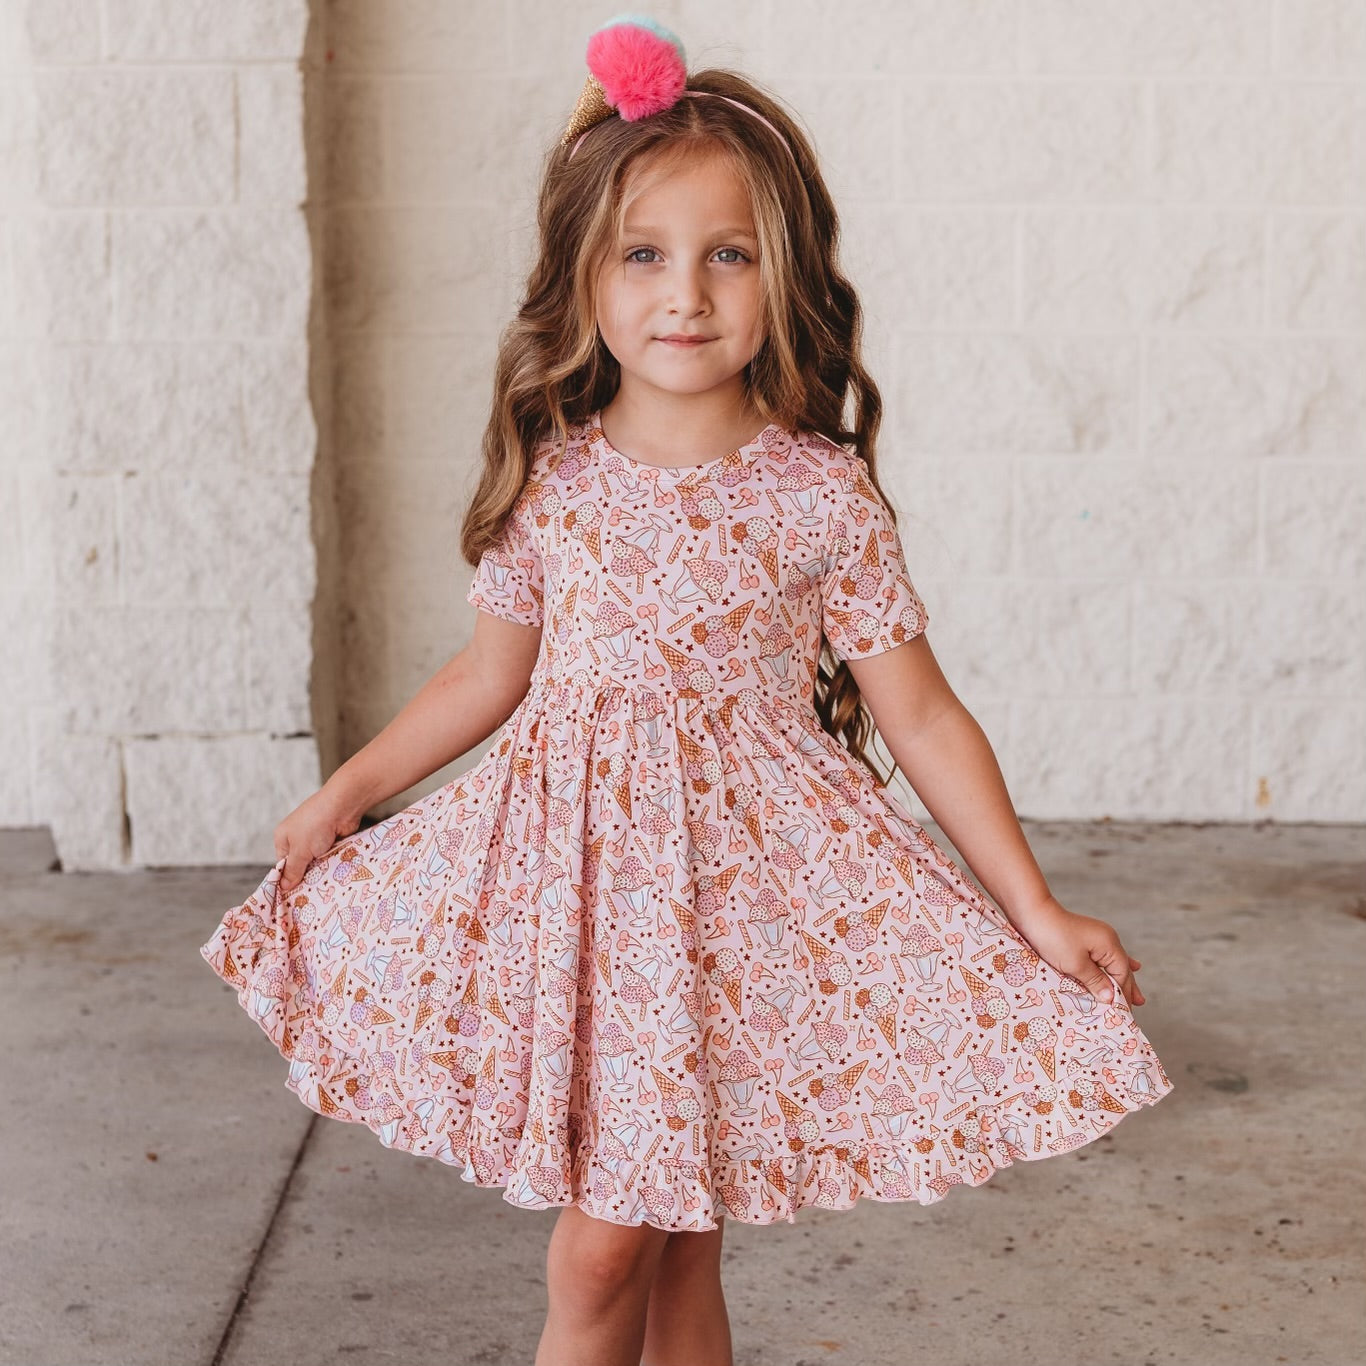 Scoop There It Is Dream Ruffle Dress